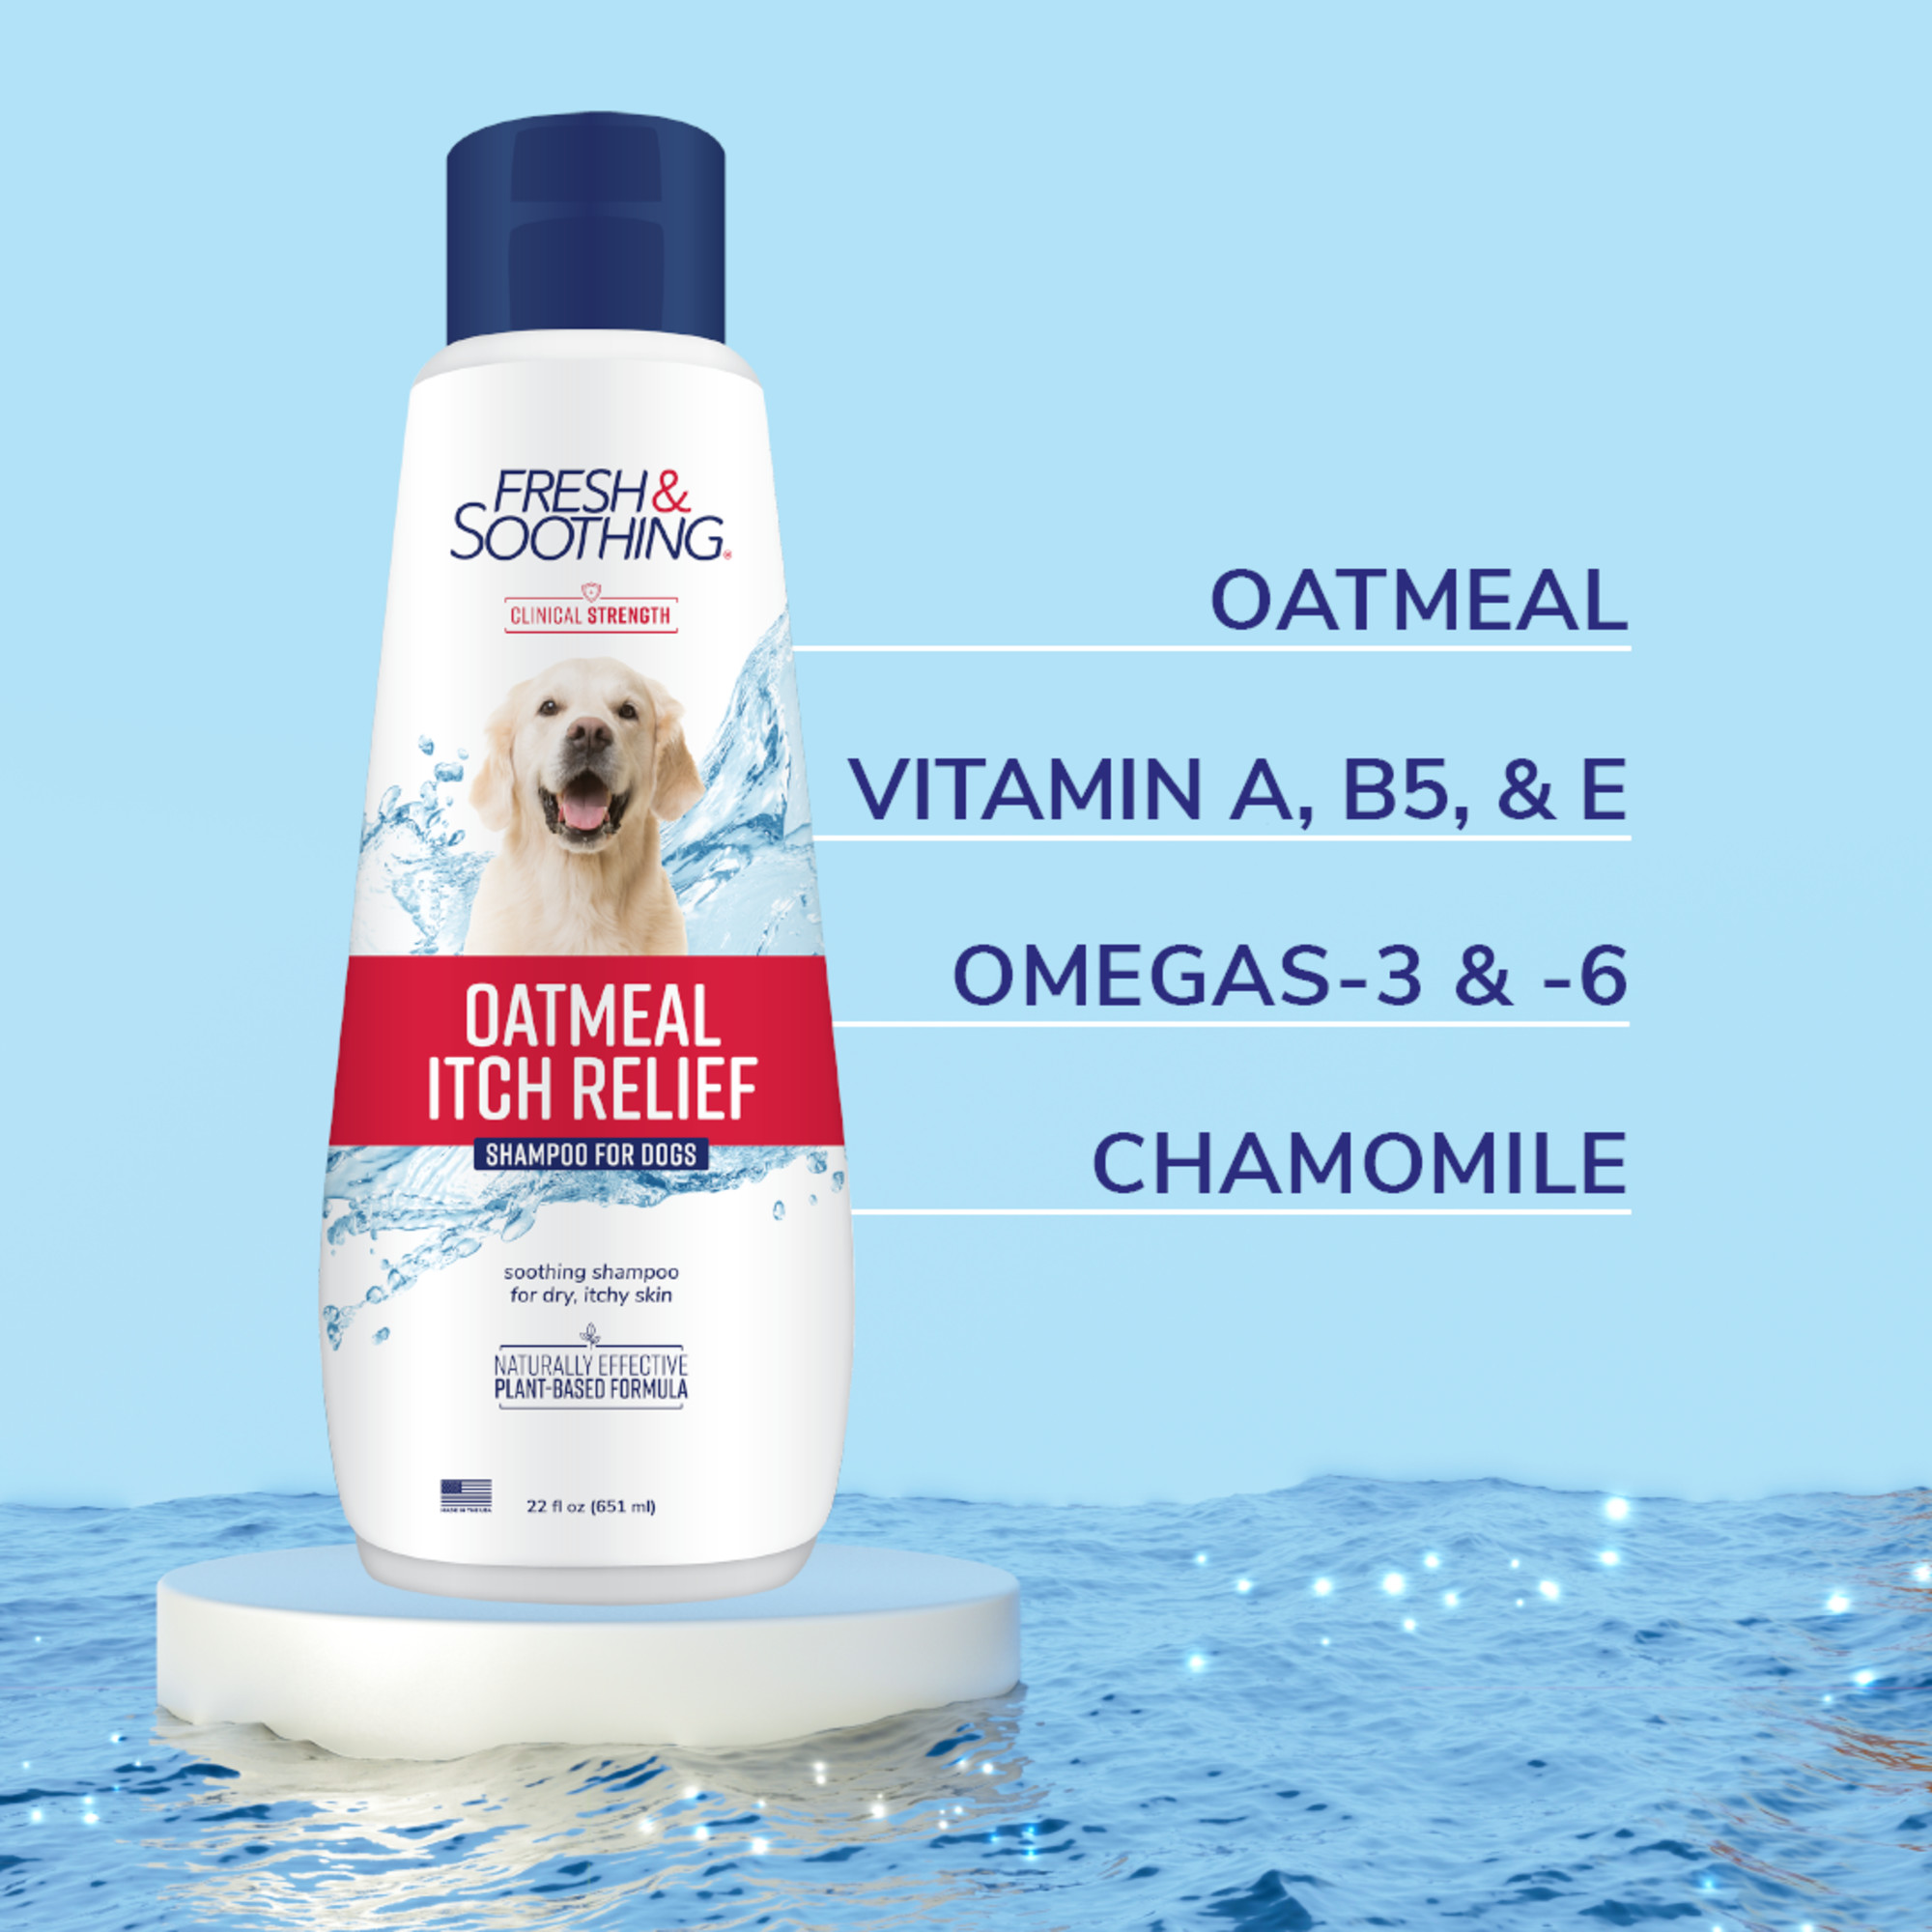 Oatmeal Itch Relief Shampoo for Pets